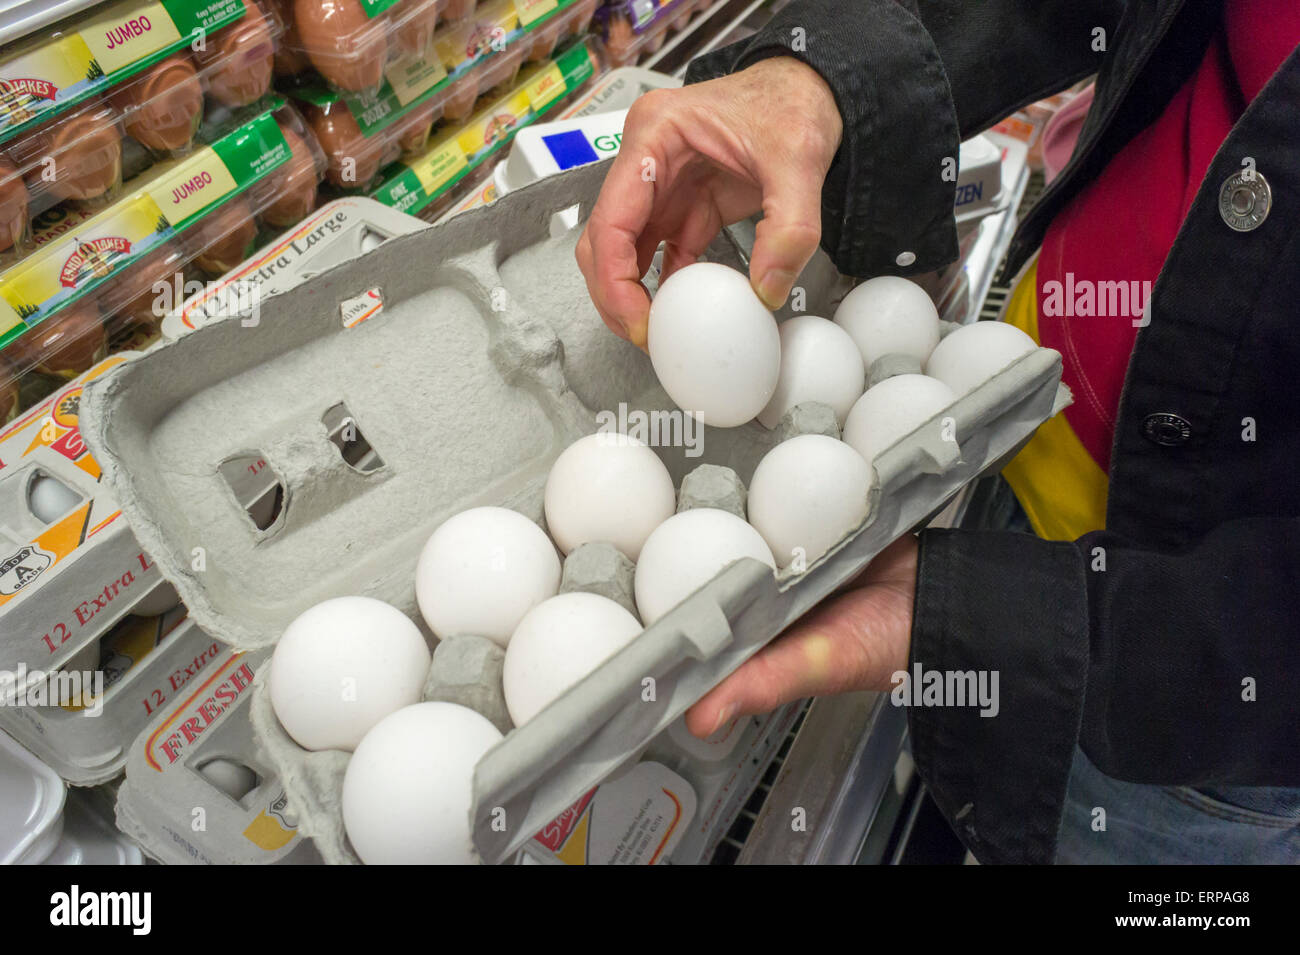 A shopper checks for broken eggs in a supermarket in New York on Wednesday, June 3, 2015. The worst outbreak of bird flu in the U.S. has caused the death of almost 45 million chickens and turkeys  causing wholesale prices to double in the last month. Over 10 percent of all the hens have died.  (© Richard B. Levine) Stock Photo